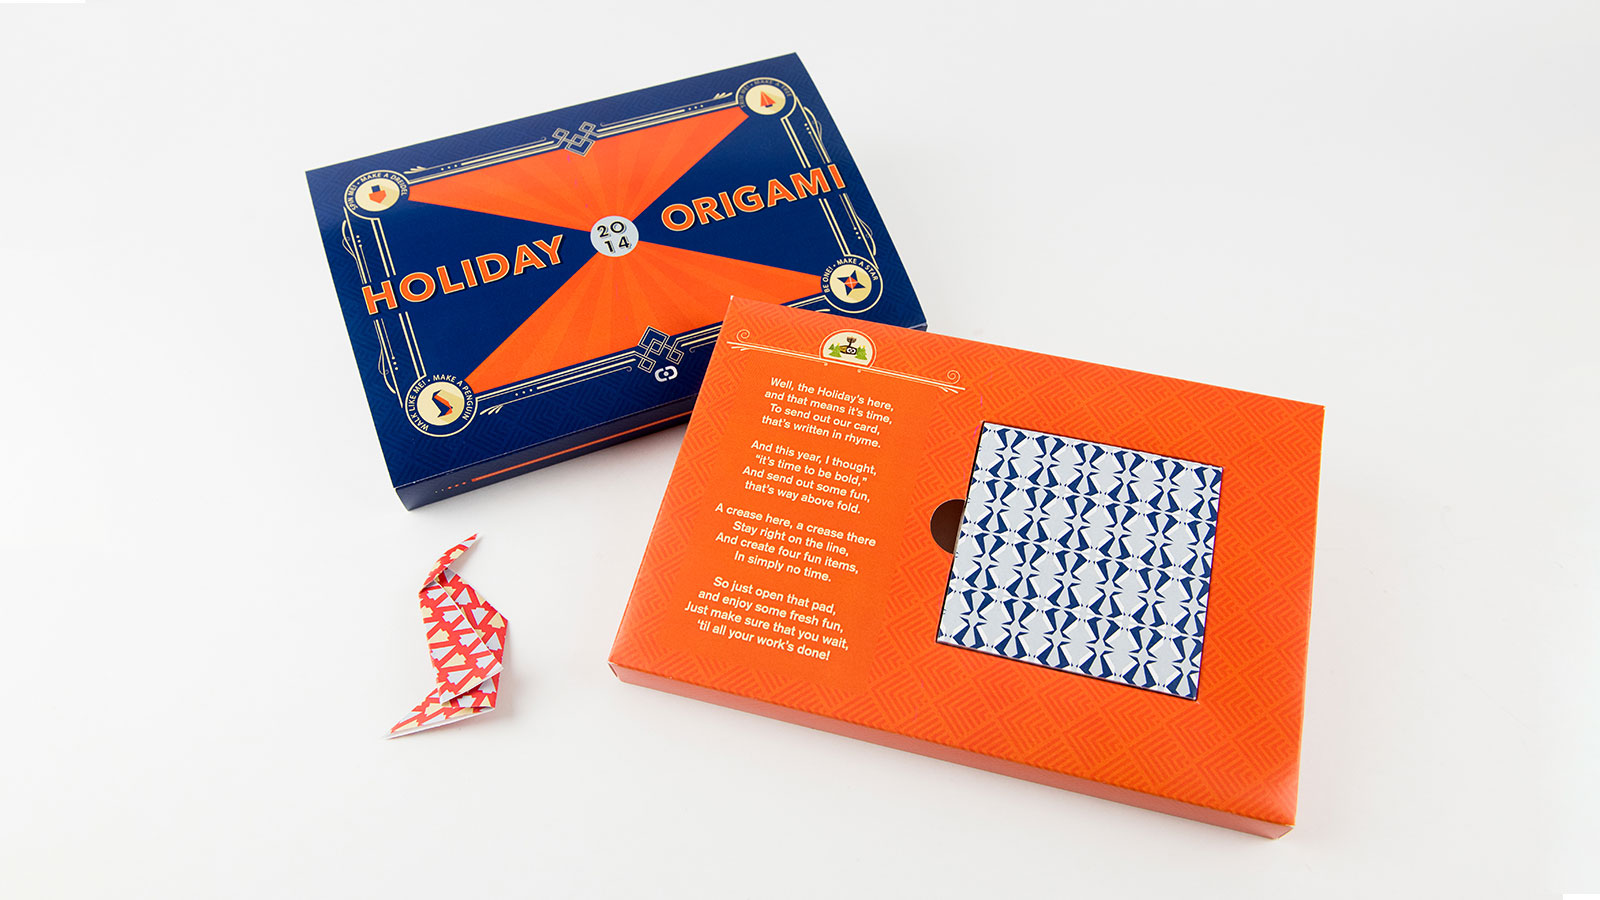 Holiday Origami Promotion – Full Packaging